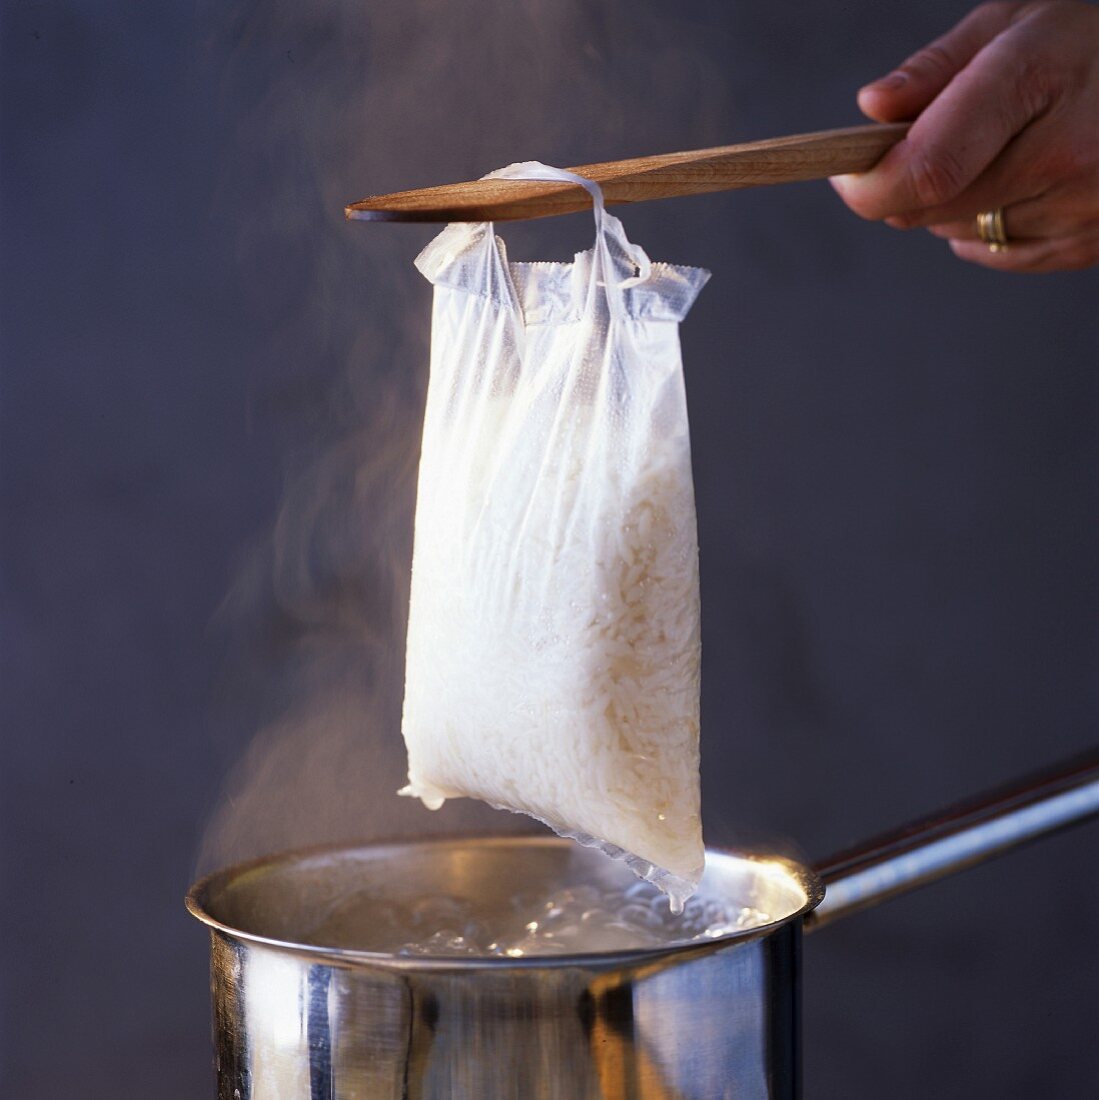 Lifting sachet of cooked rice from pan